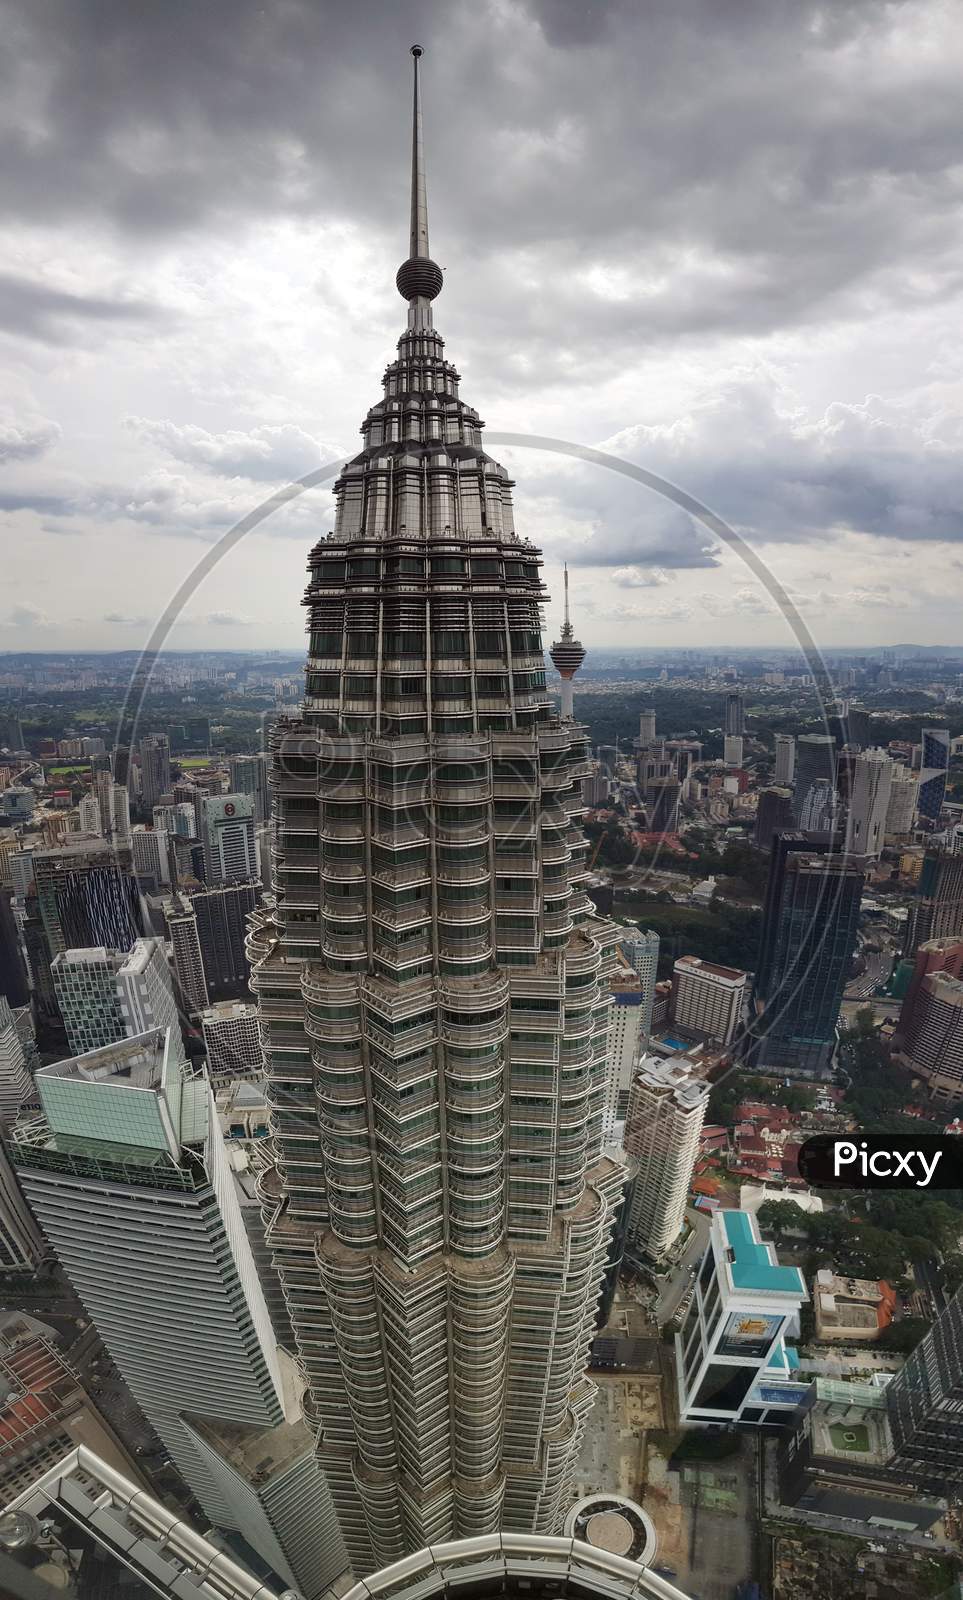 The View Of A Petronus Tower From Another Tower With Kuala Lampur City Scape Horizon In The Background.